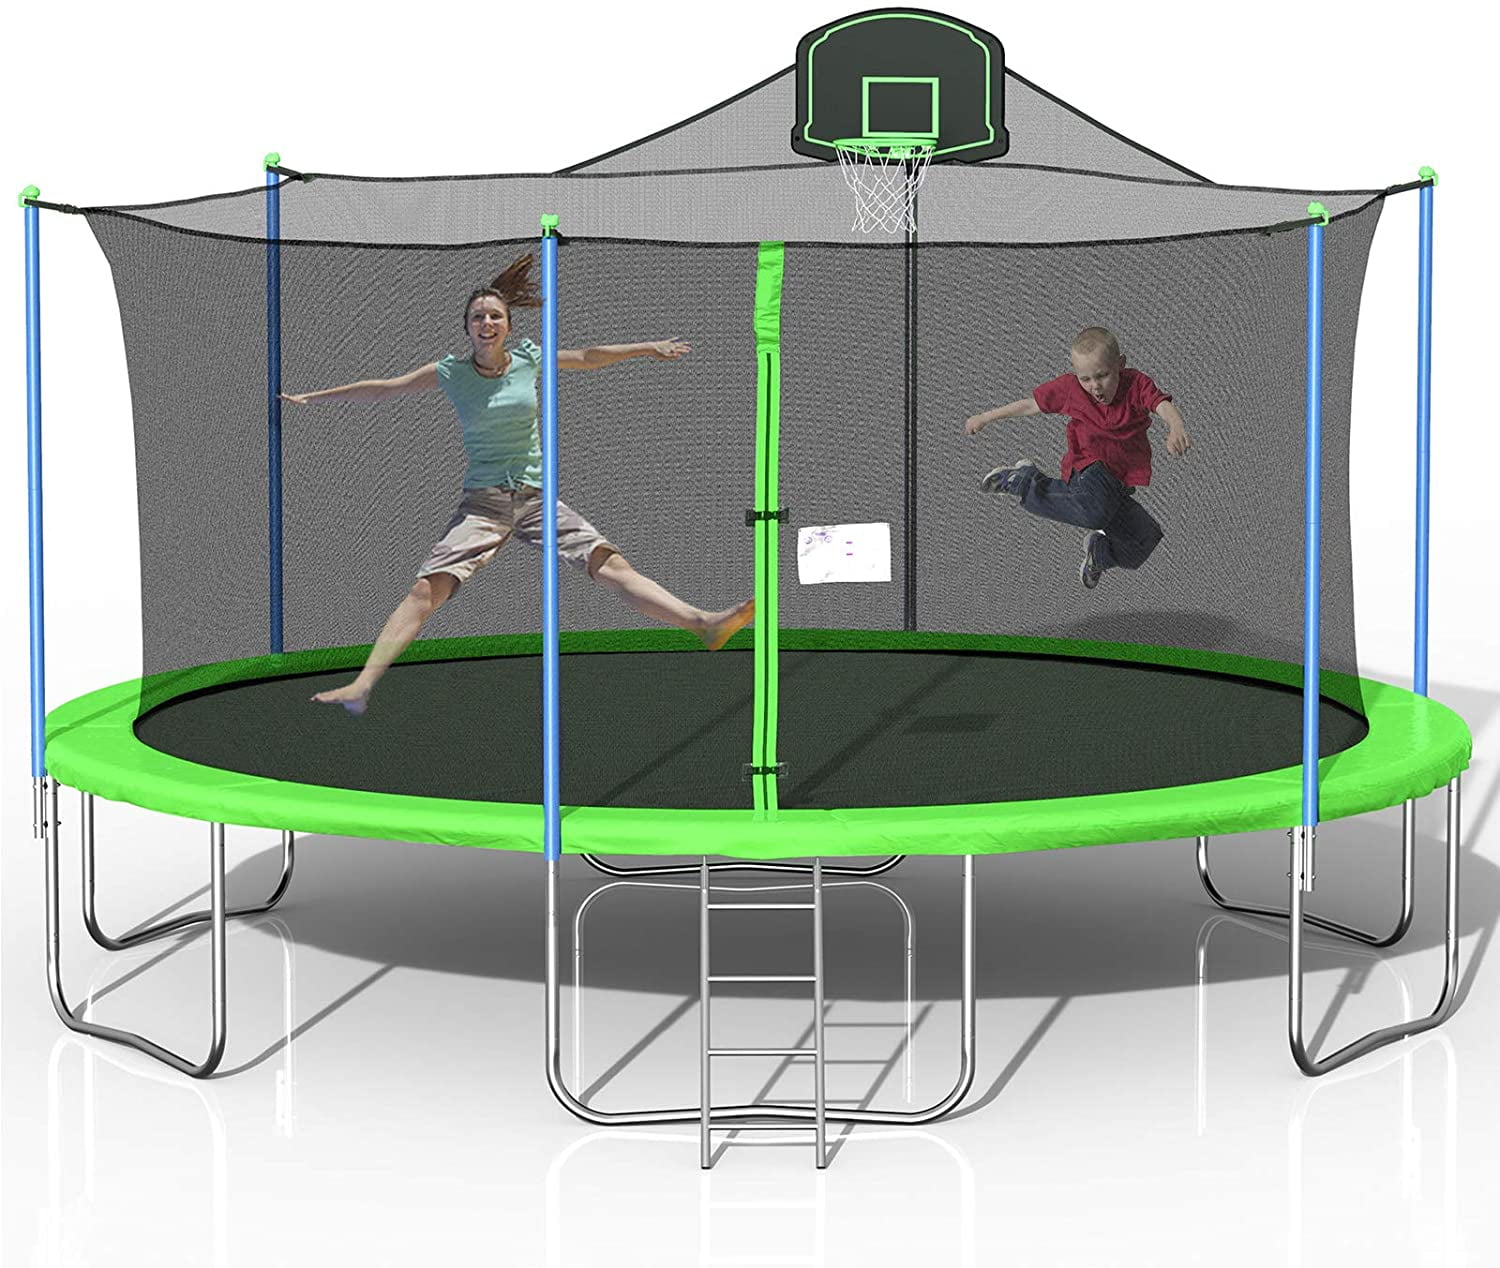 with Enclosure Net & Safety Pad & Basketball Hoop & Soccer Goal and Ladder Capacity for 6-8 Children Round Jumping Mat Outdoor Backyard Exercise ATY 16FT Trampoline for Kids 